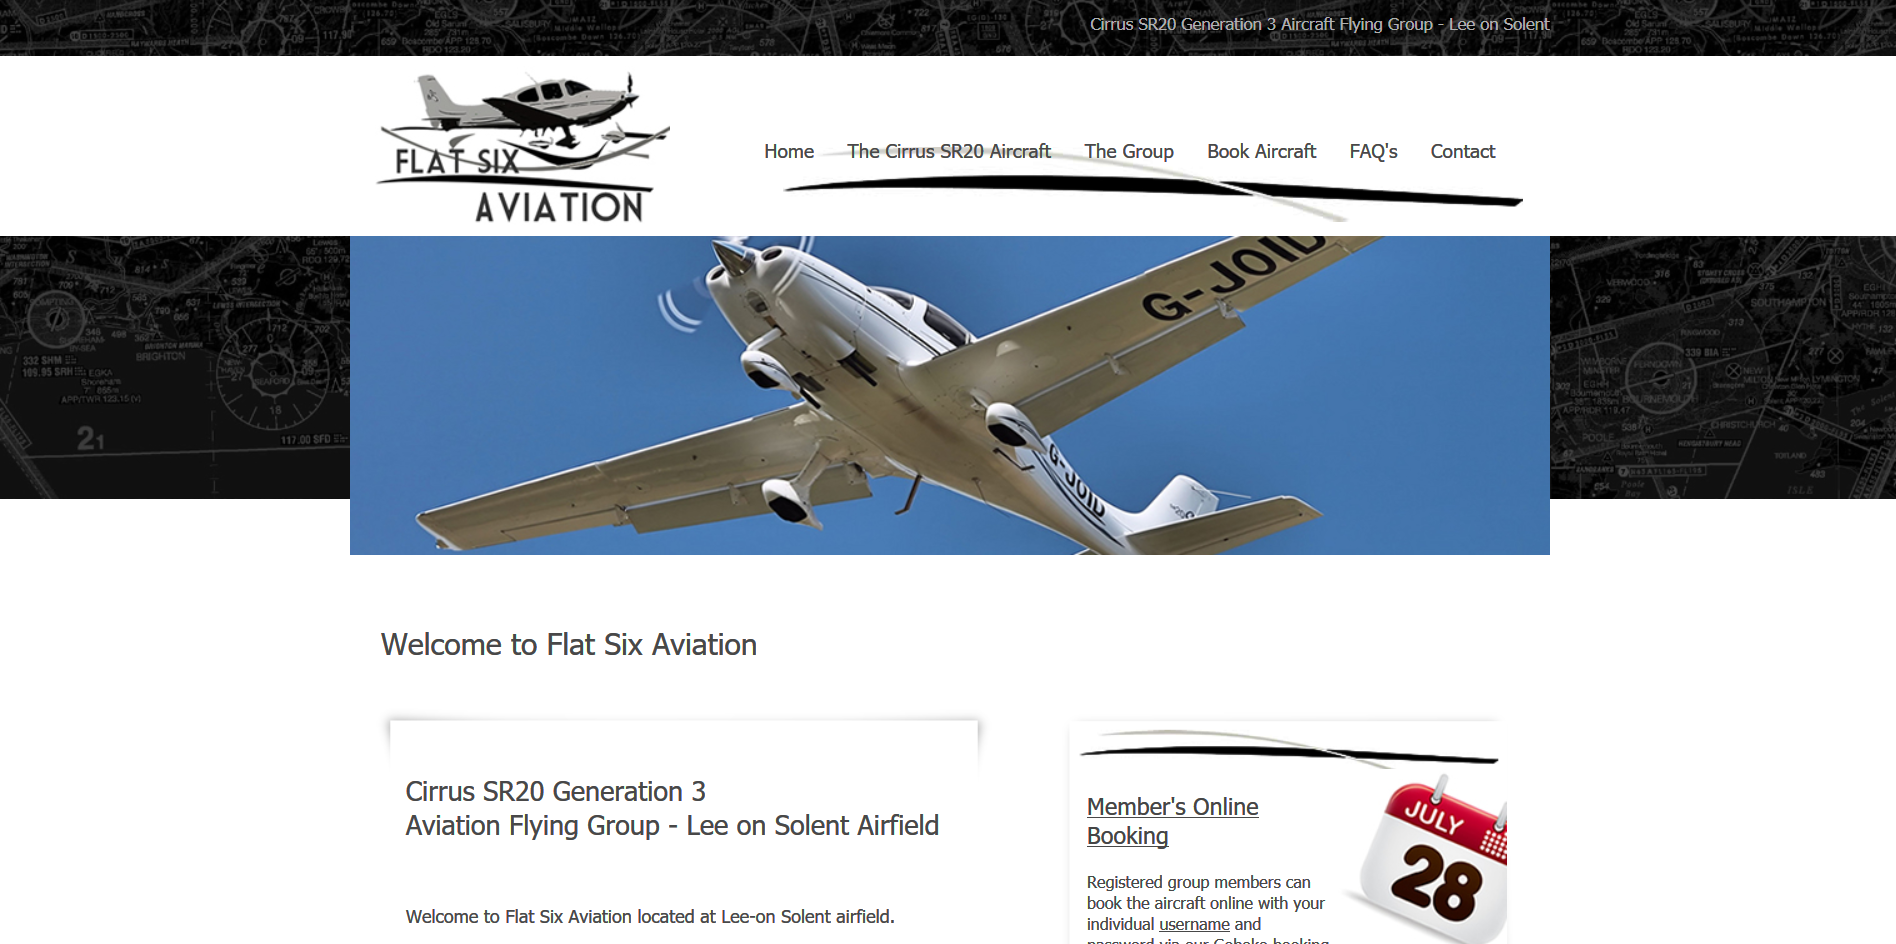 Sample of the design work on the Flat Six Aviation website